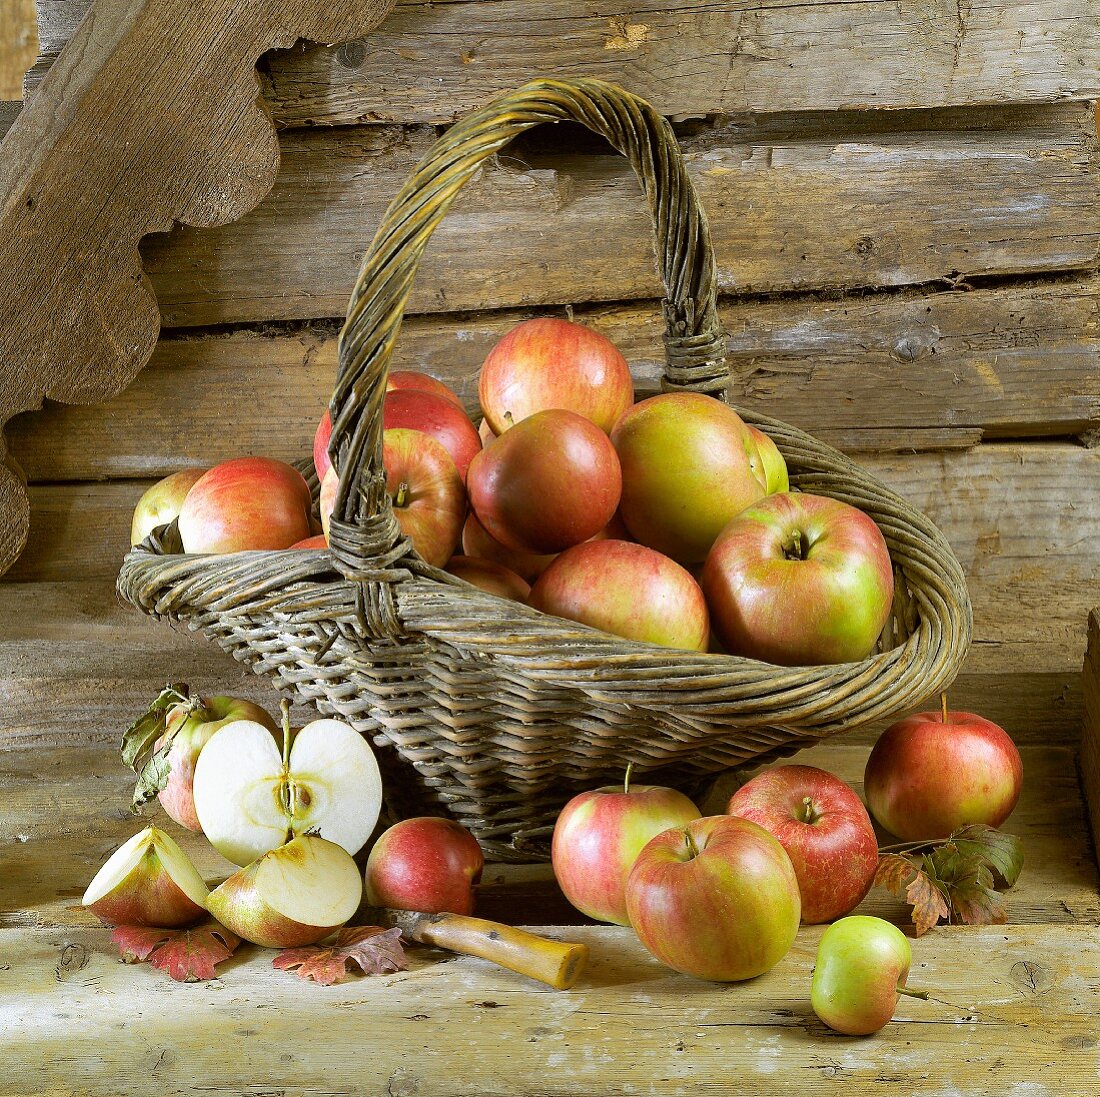 Apples in and in front of basket